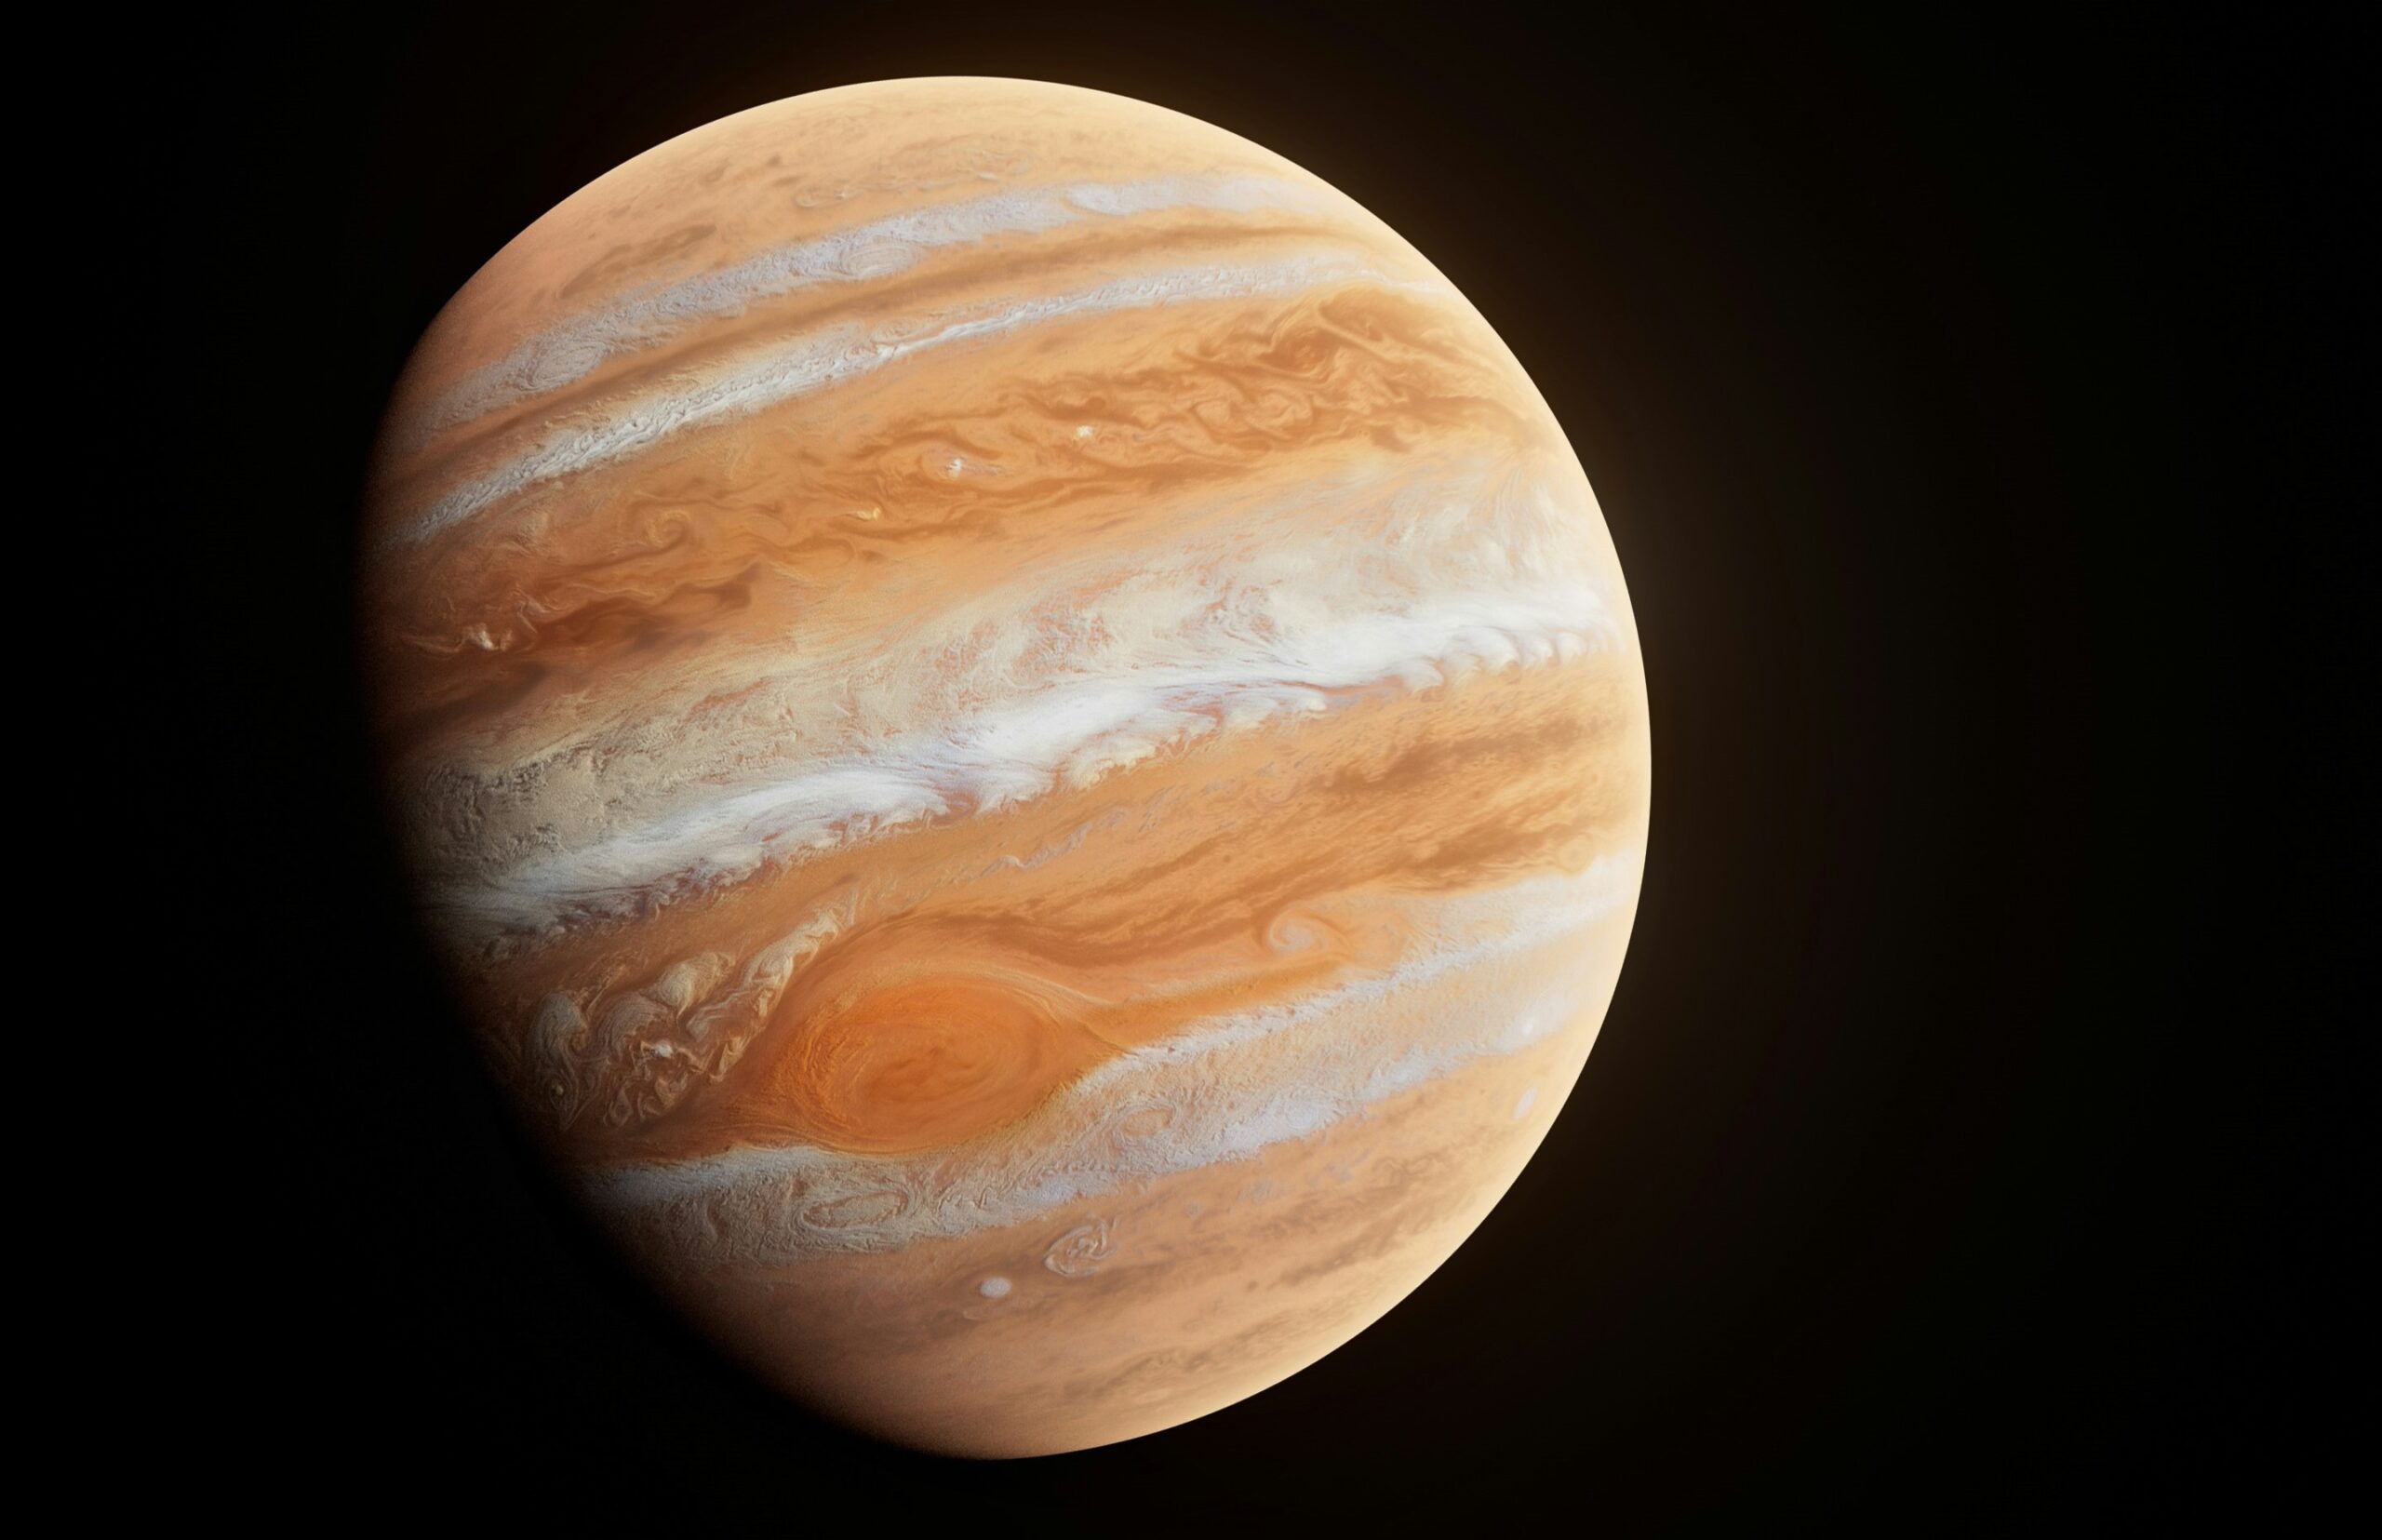 Astronomers mistaken about the age of Jupiter’s red spot